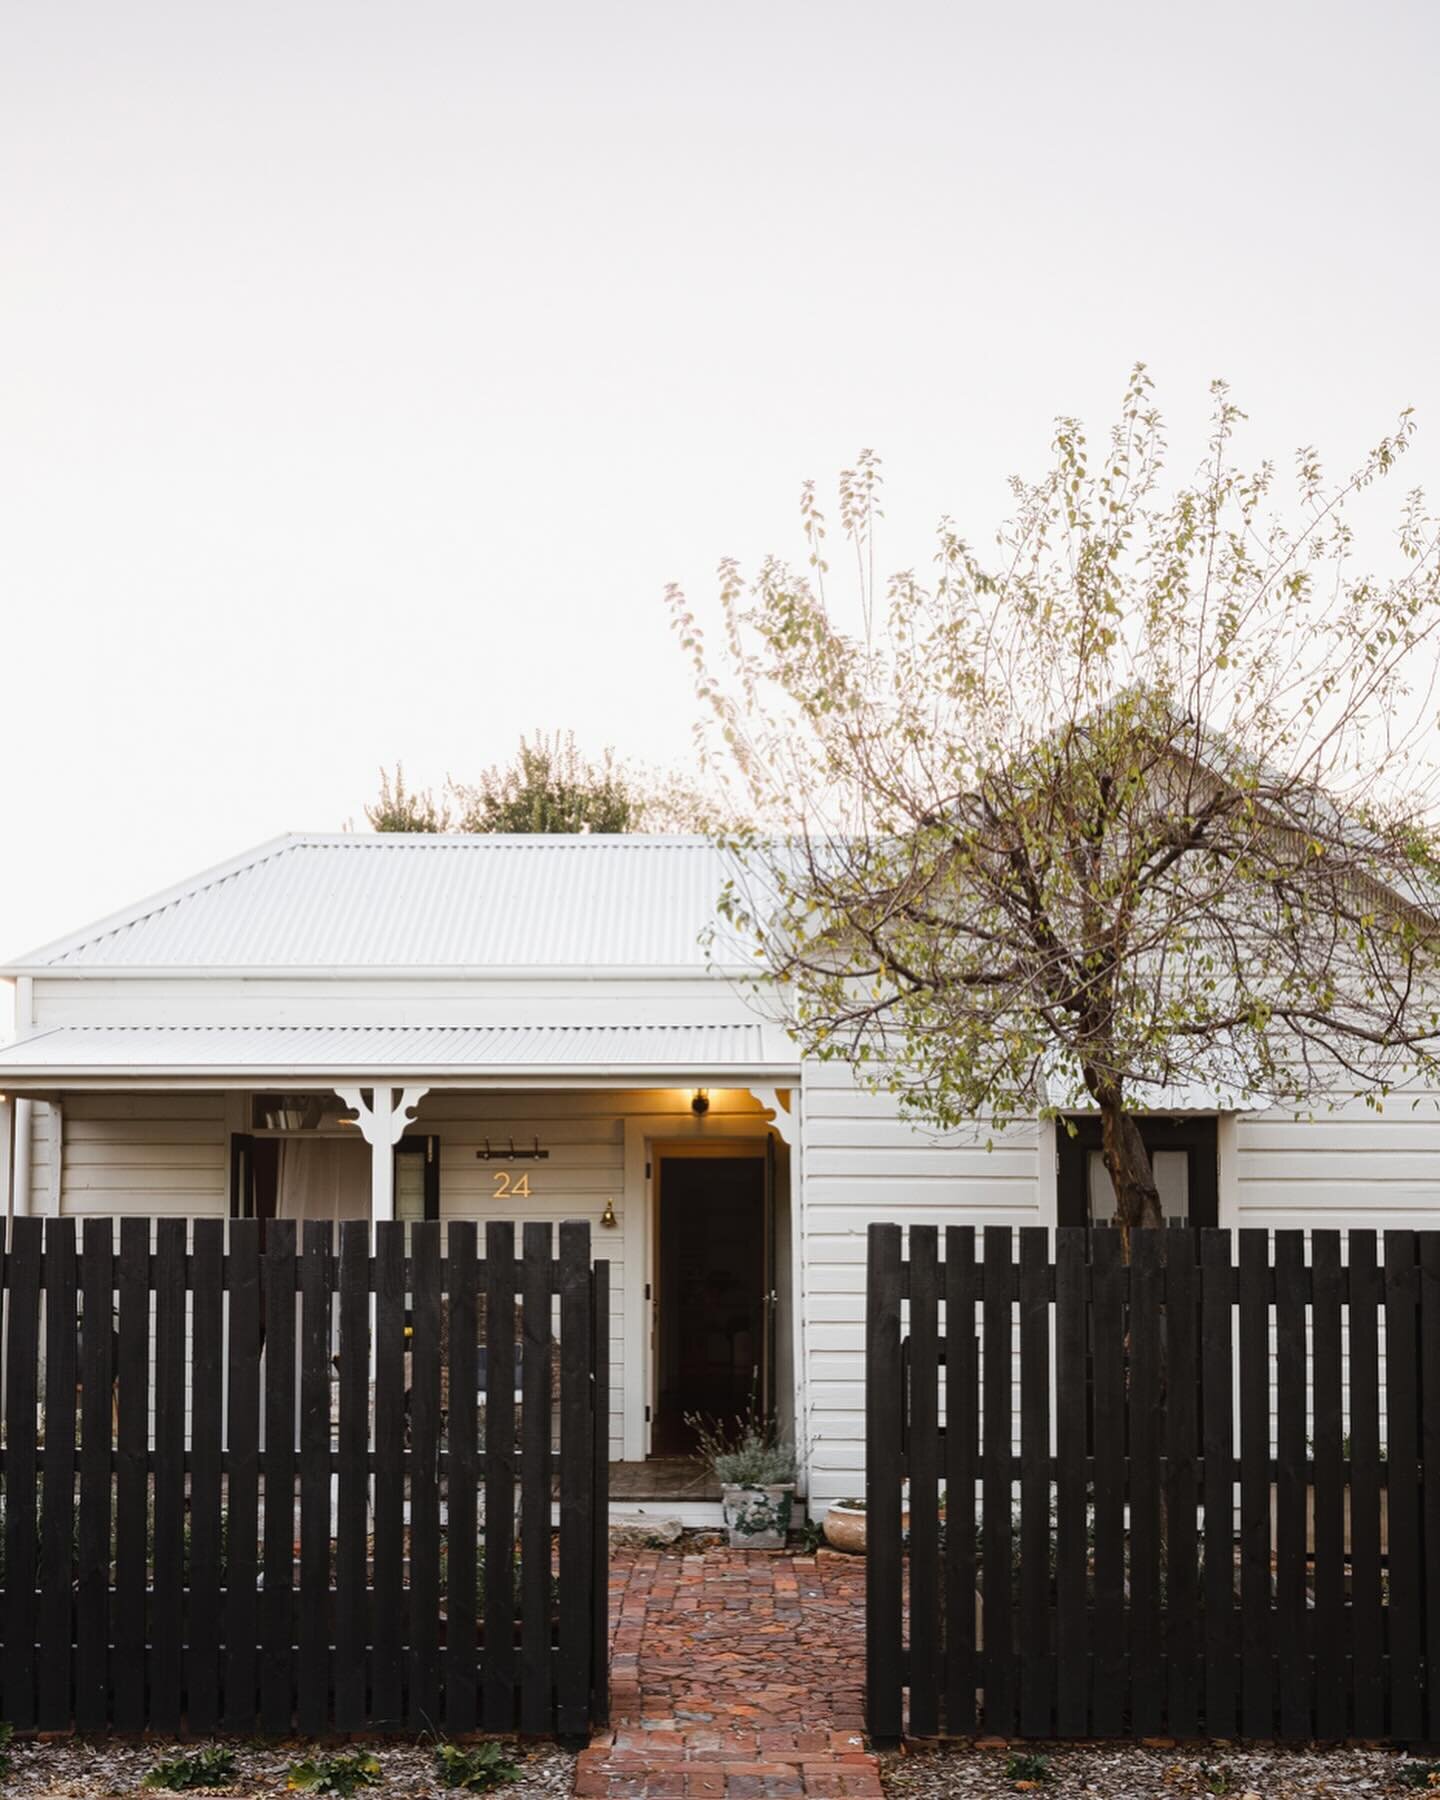 Say hello to La&rsquo;Loft, a 1900s workers cottage I fell absolutely in love with. 

-

#canonaustralia #canonANZpro #mudgee #holidayherethisyear #countryliving #coescape #airbnbaustralia #australianarchitecture